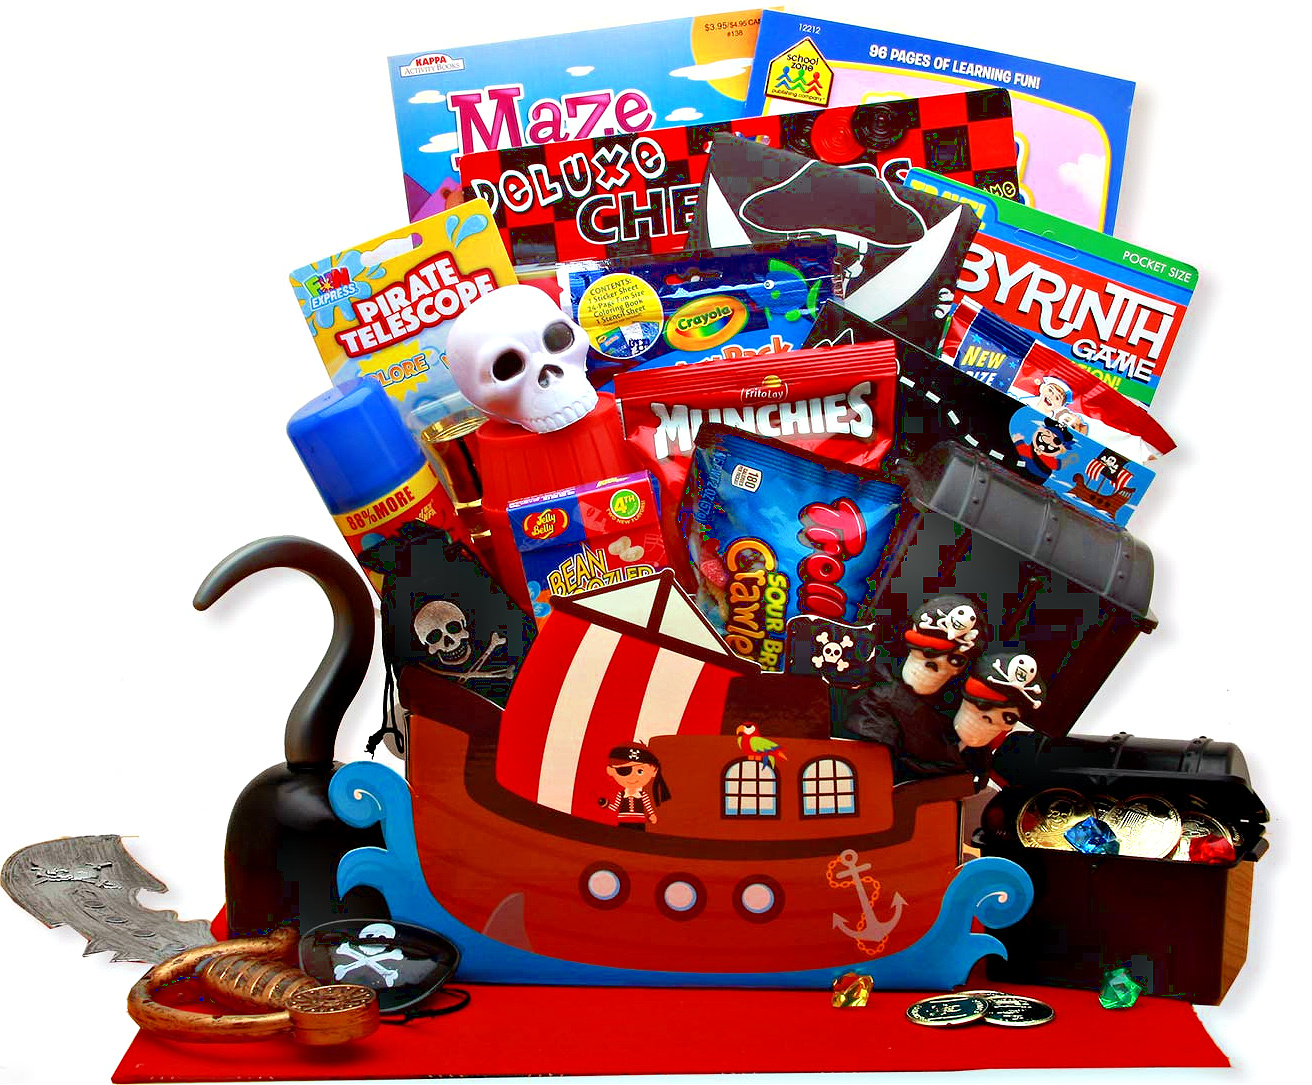 A Pirate's Life Gift Box For Children